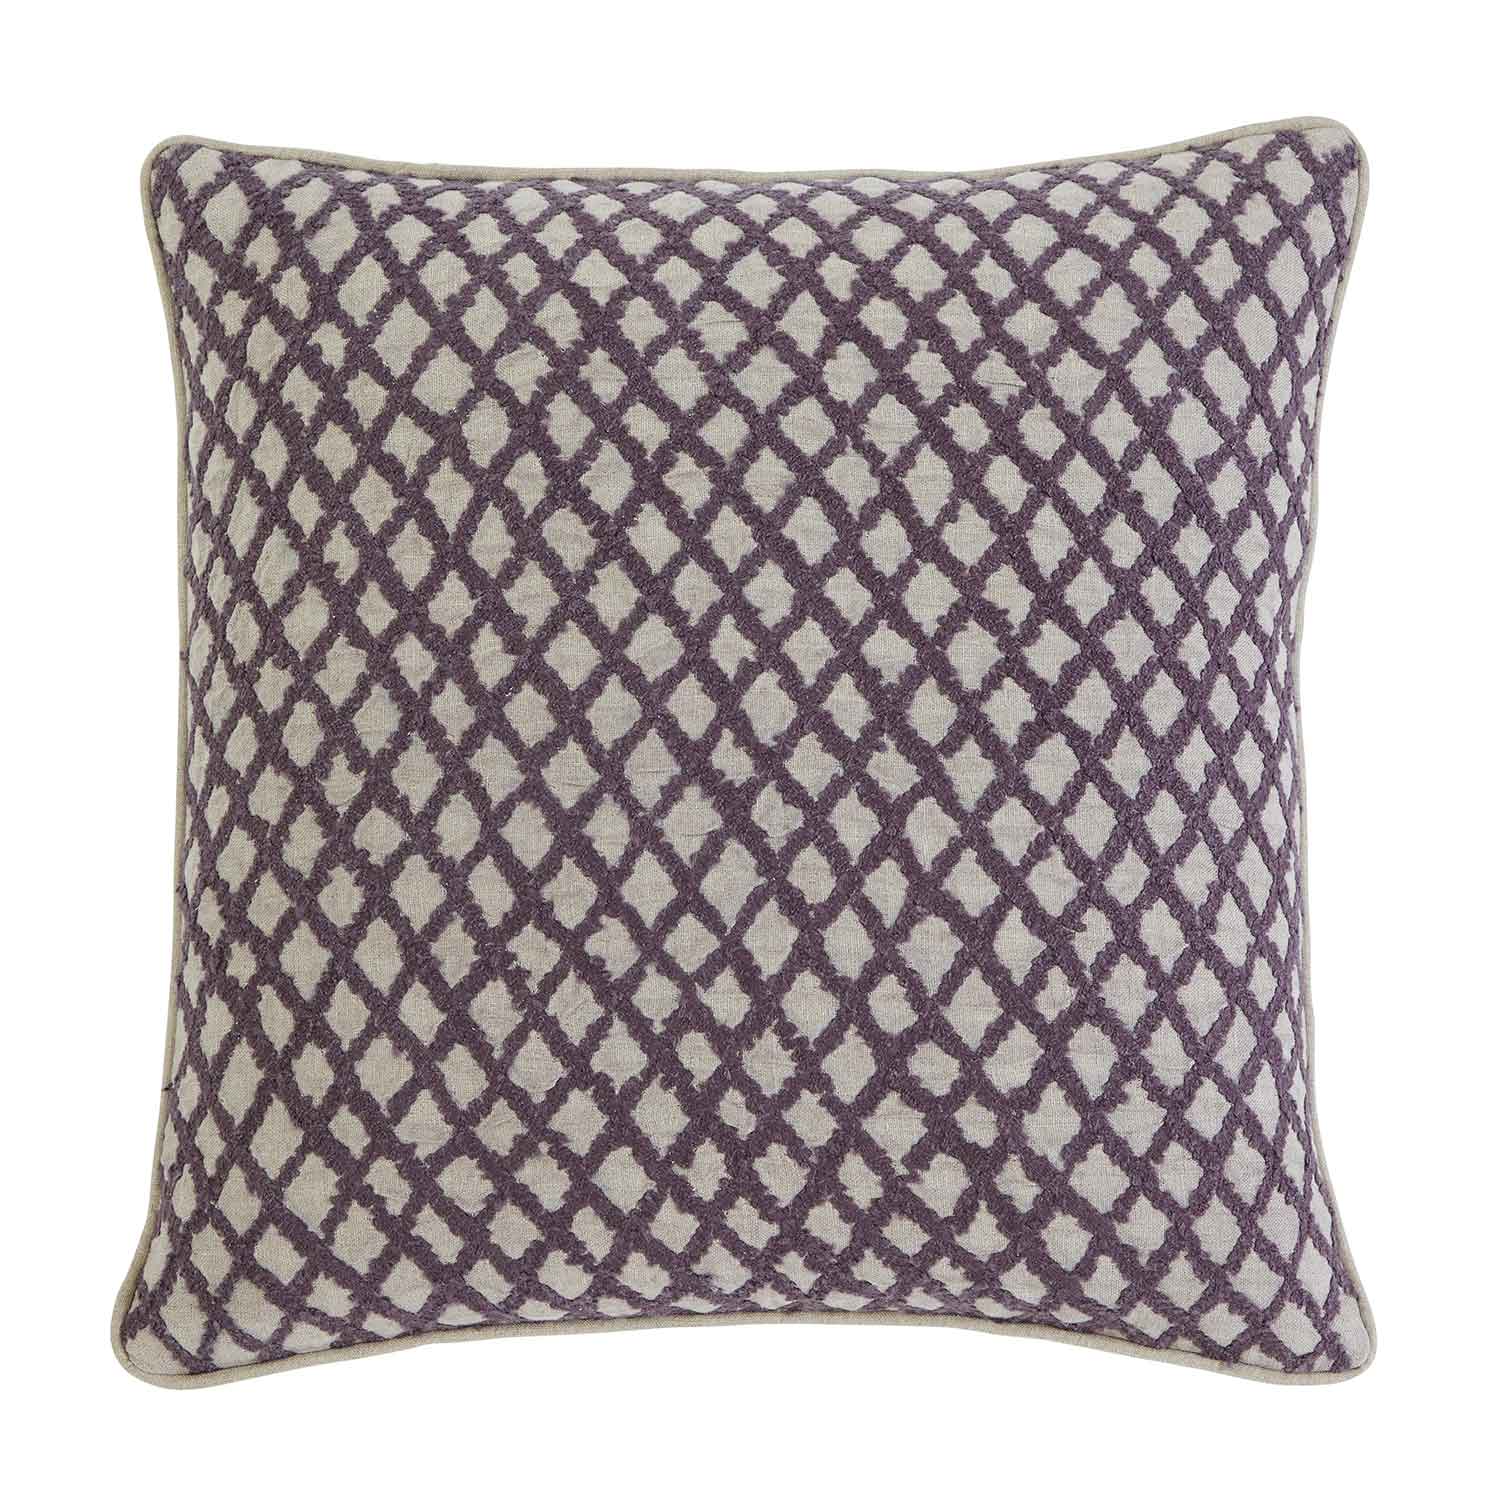 Ashley Stitched Pillow Cover - Set of 4 - Plum